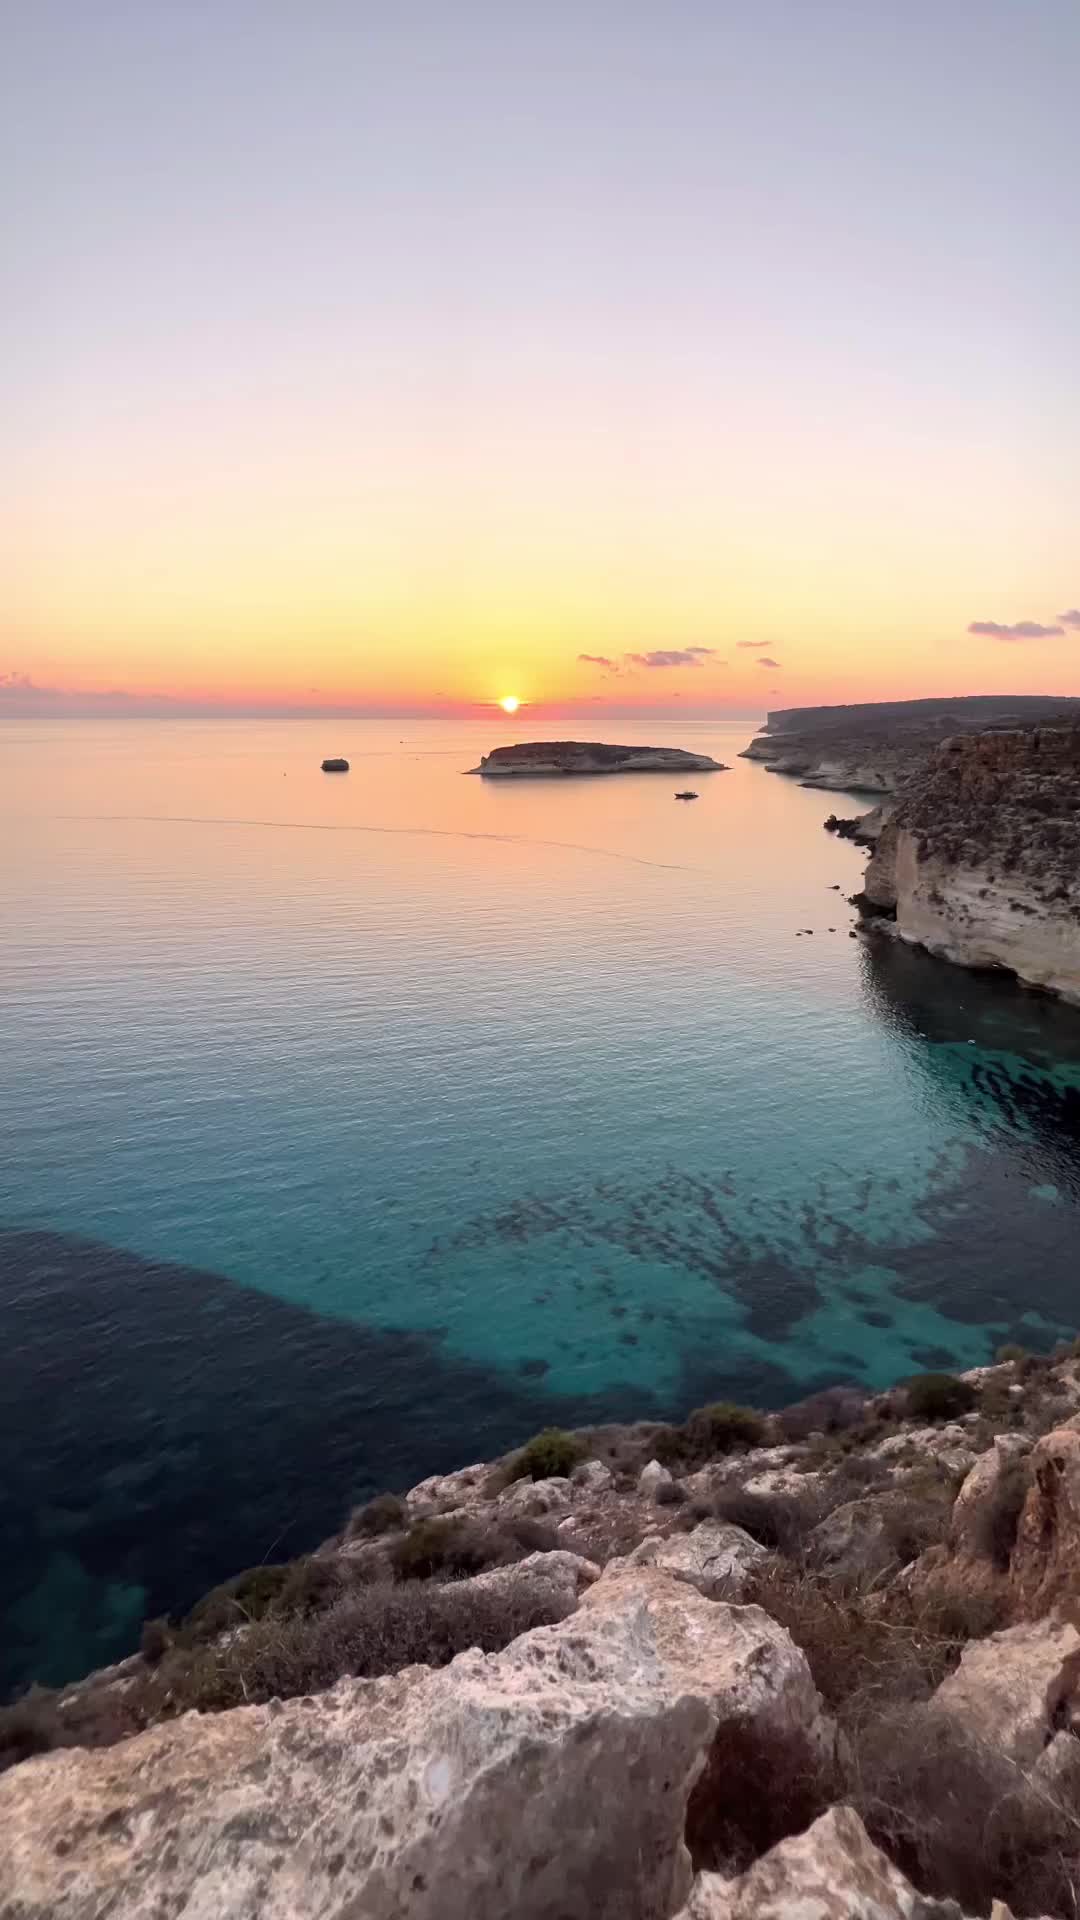 Discover Lampedusa's Tranquil Beauty at Sunset